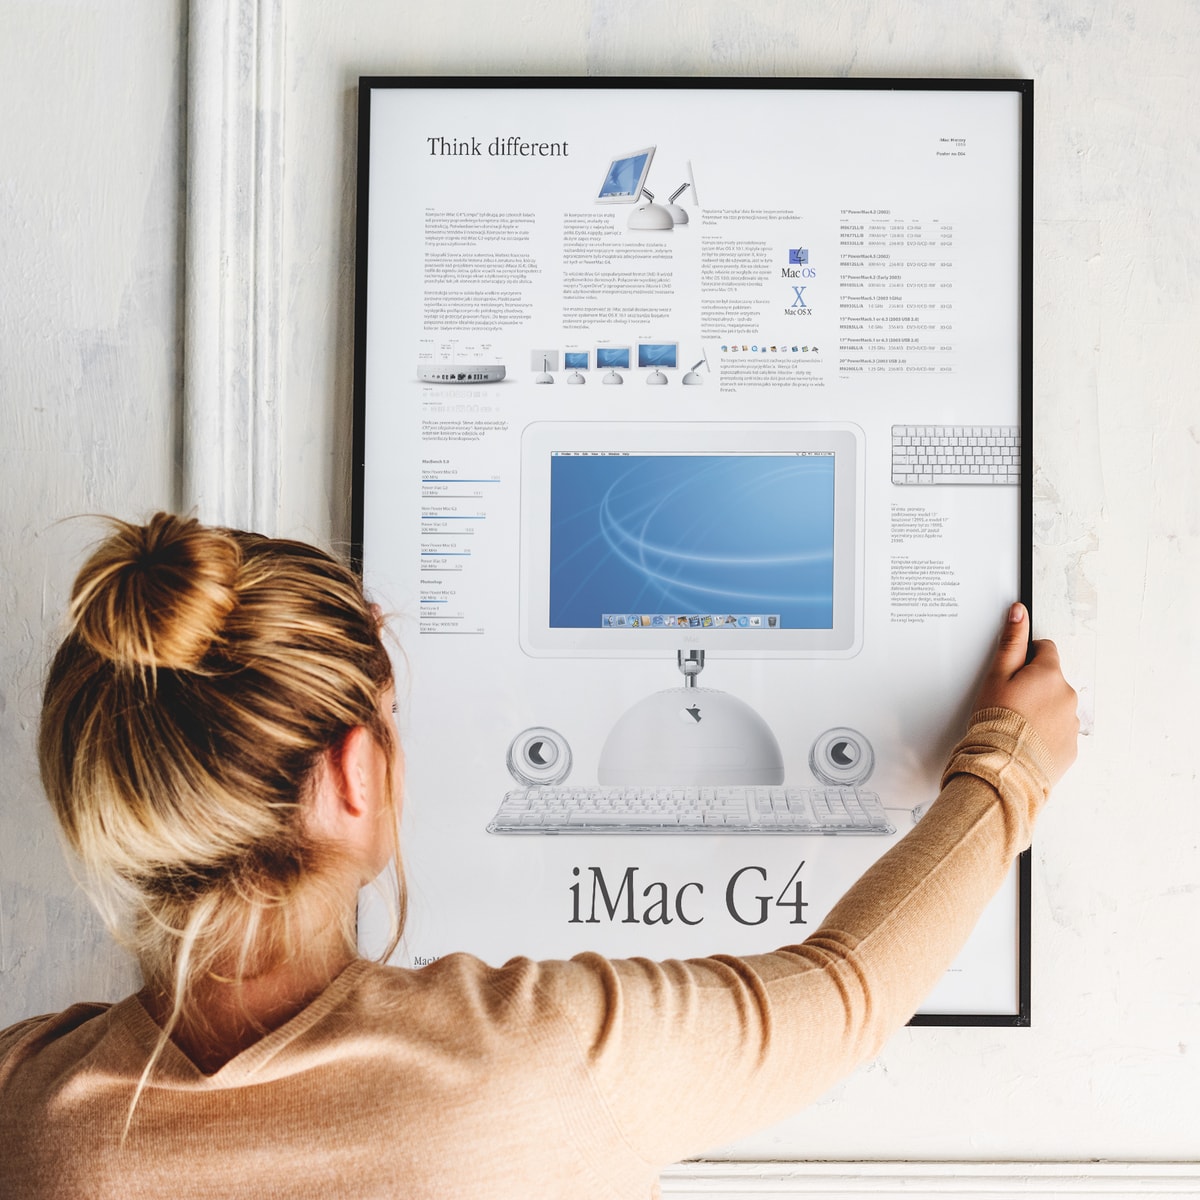 iMac G4 infographic poster